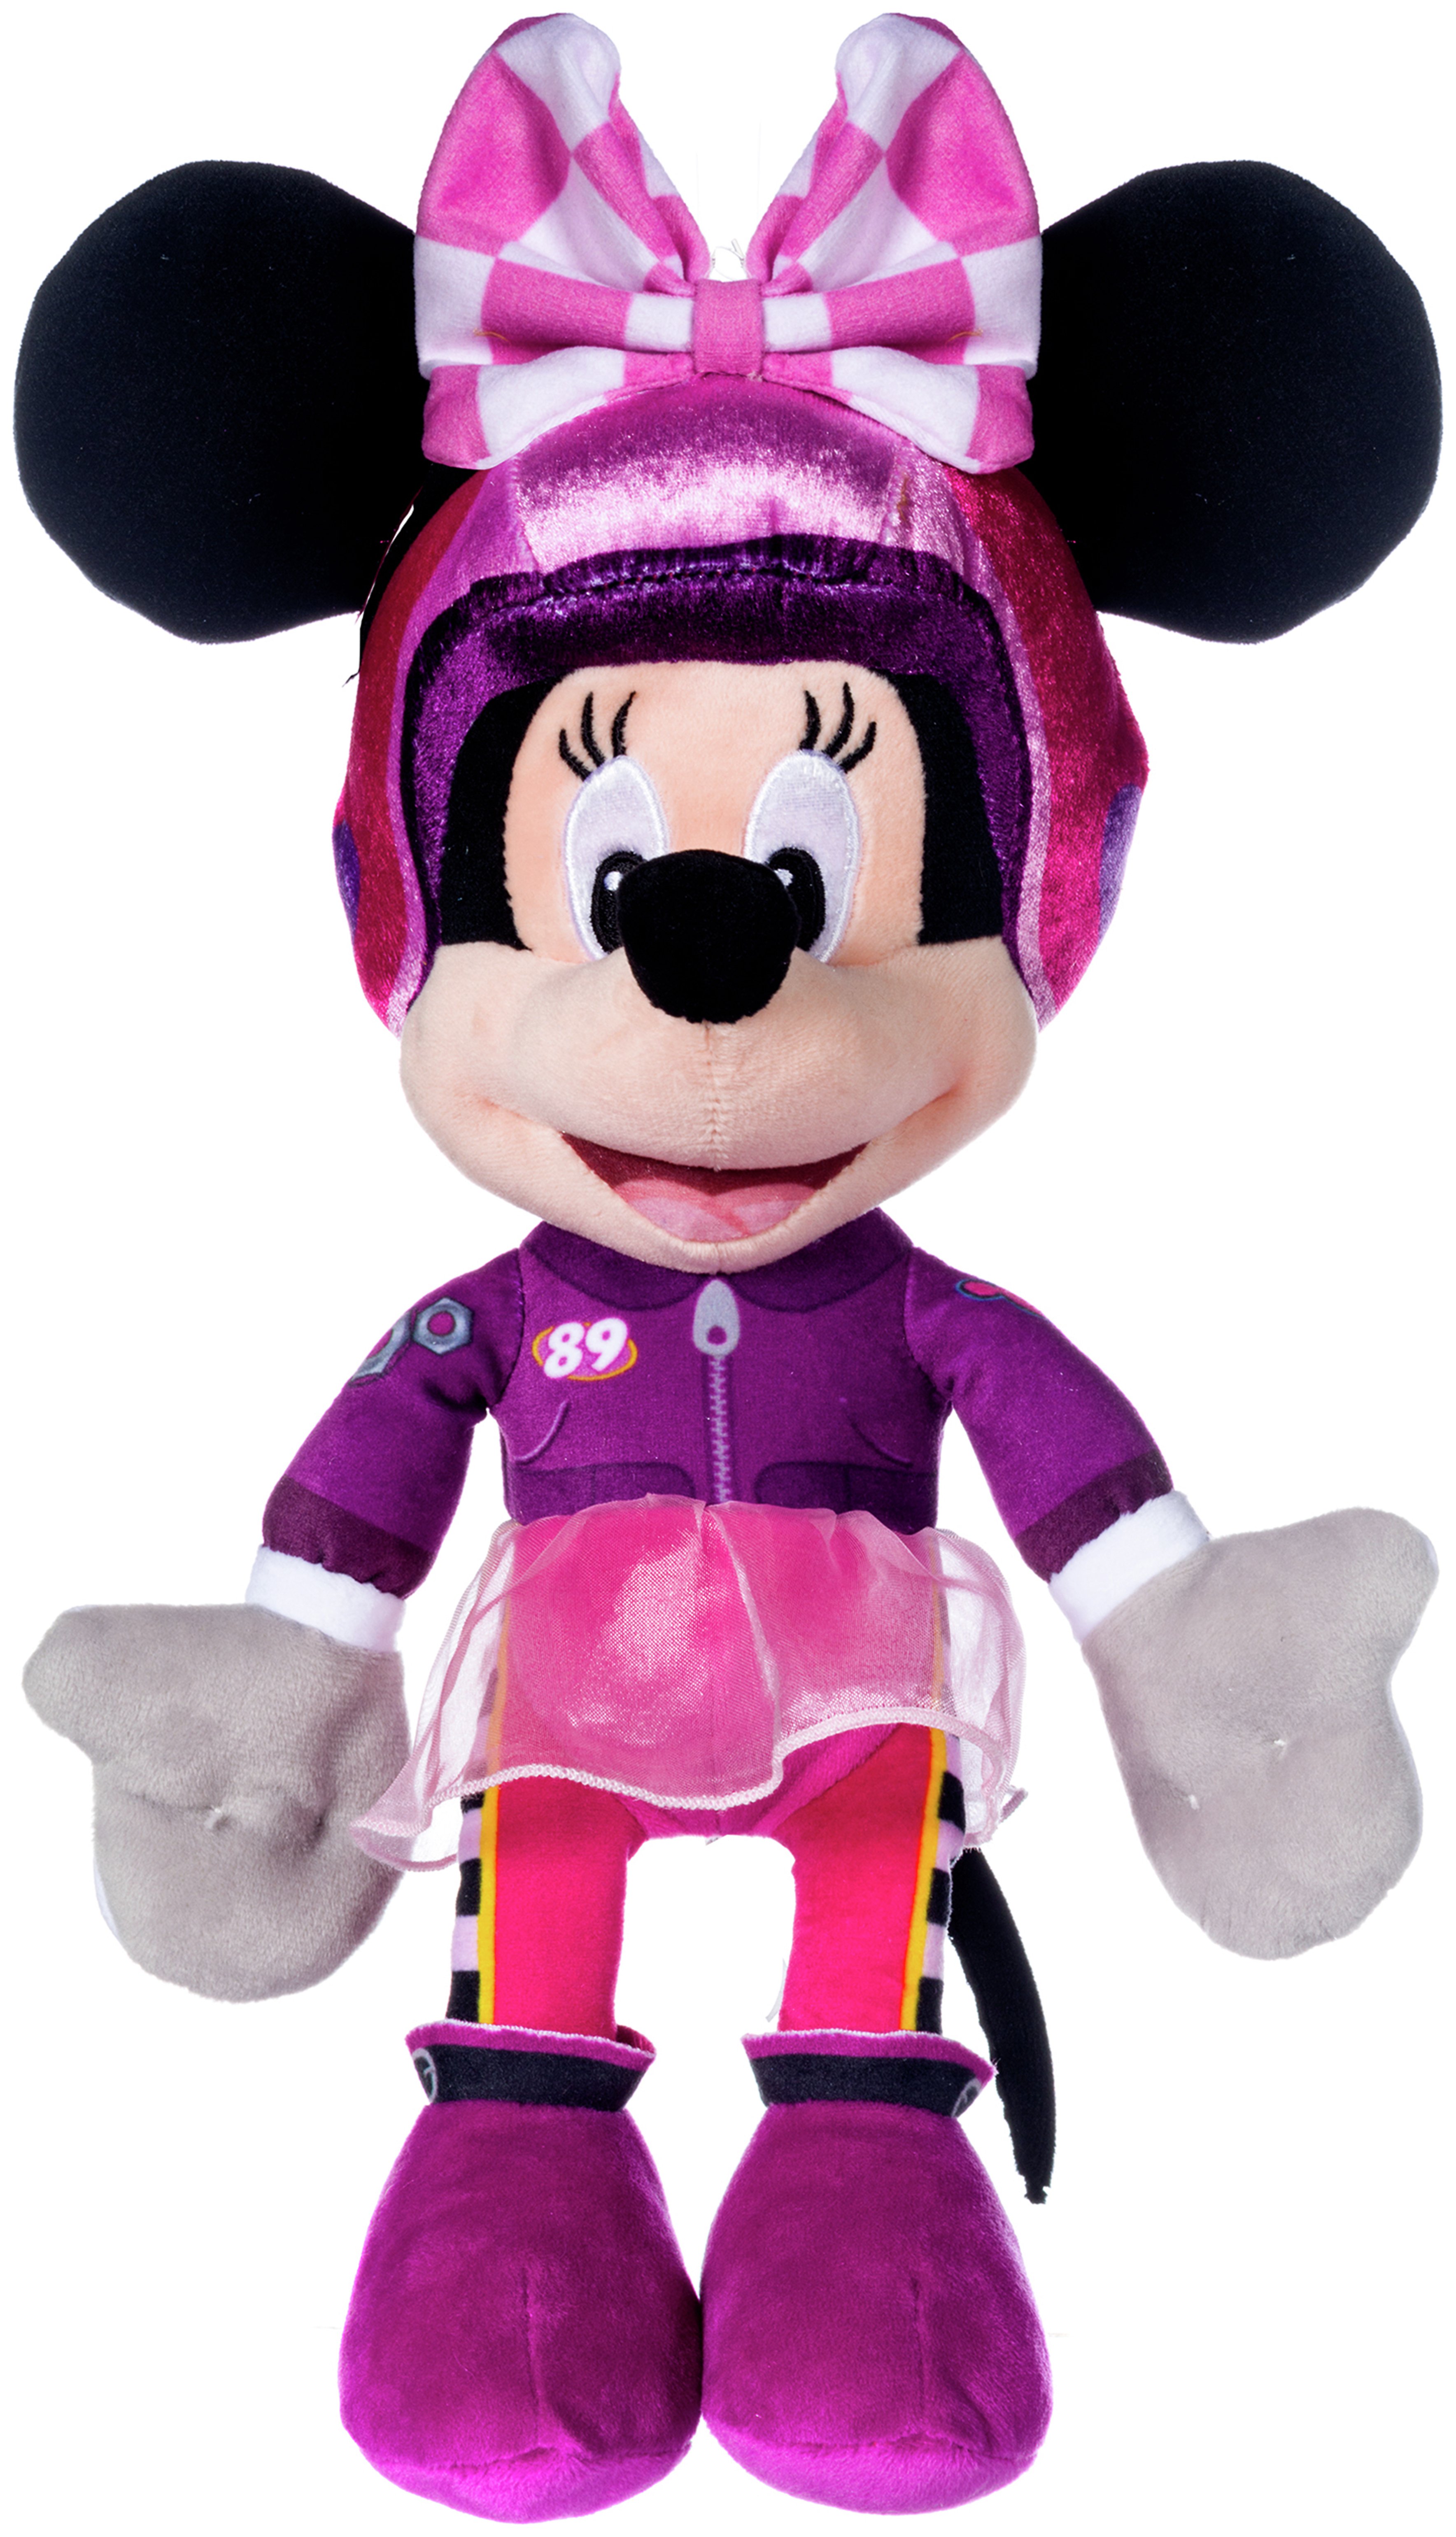 Disney Mickey and the Roadster Racers Minnie Mouse Soft Toy Reviews